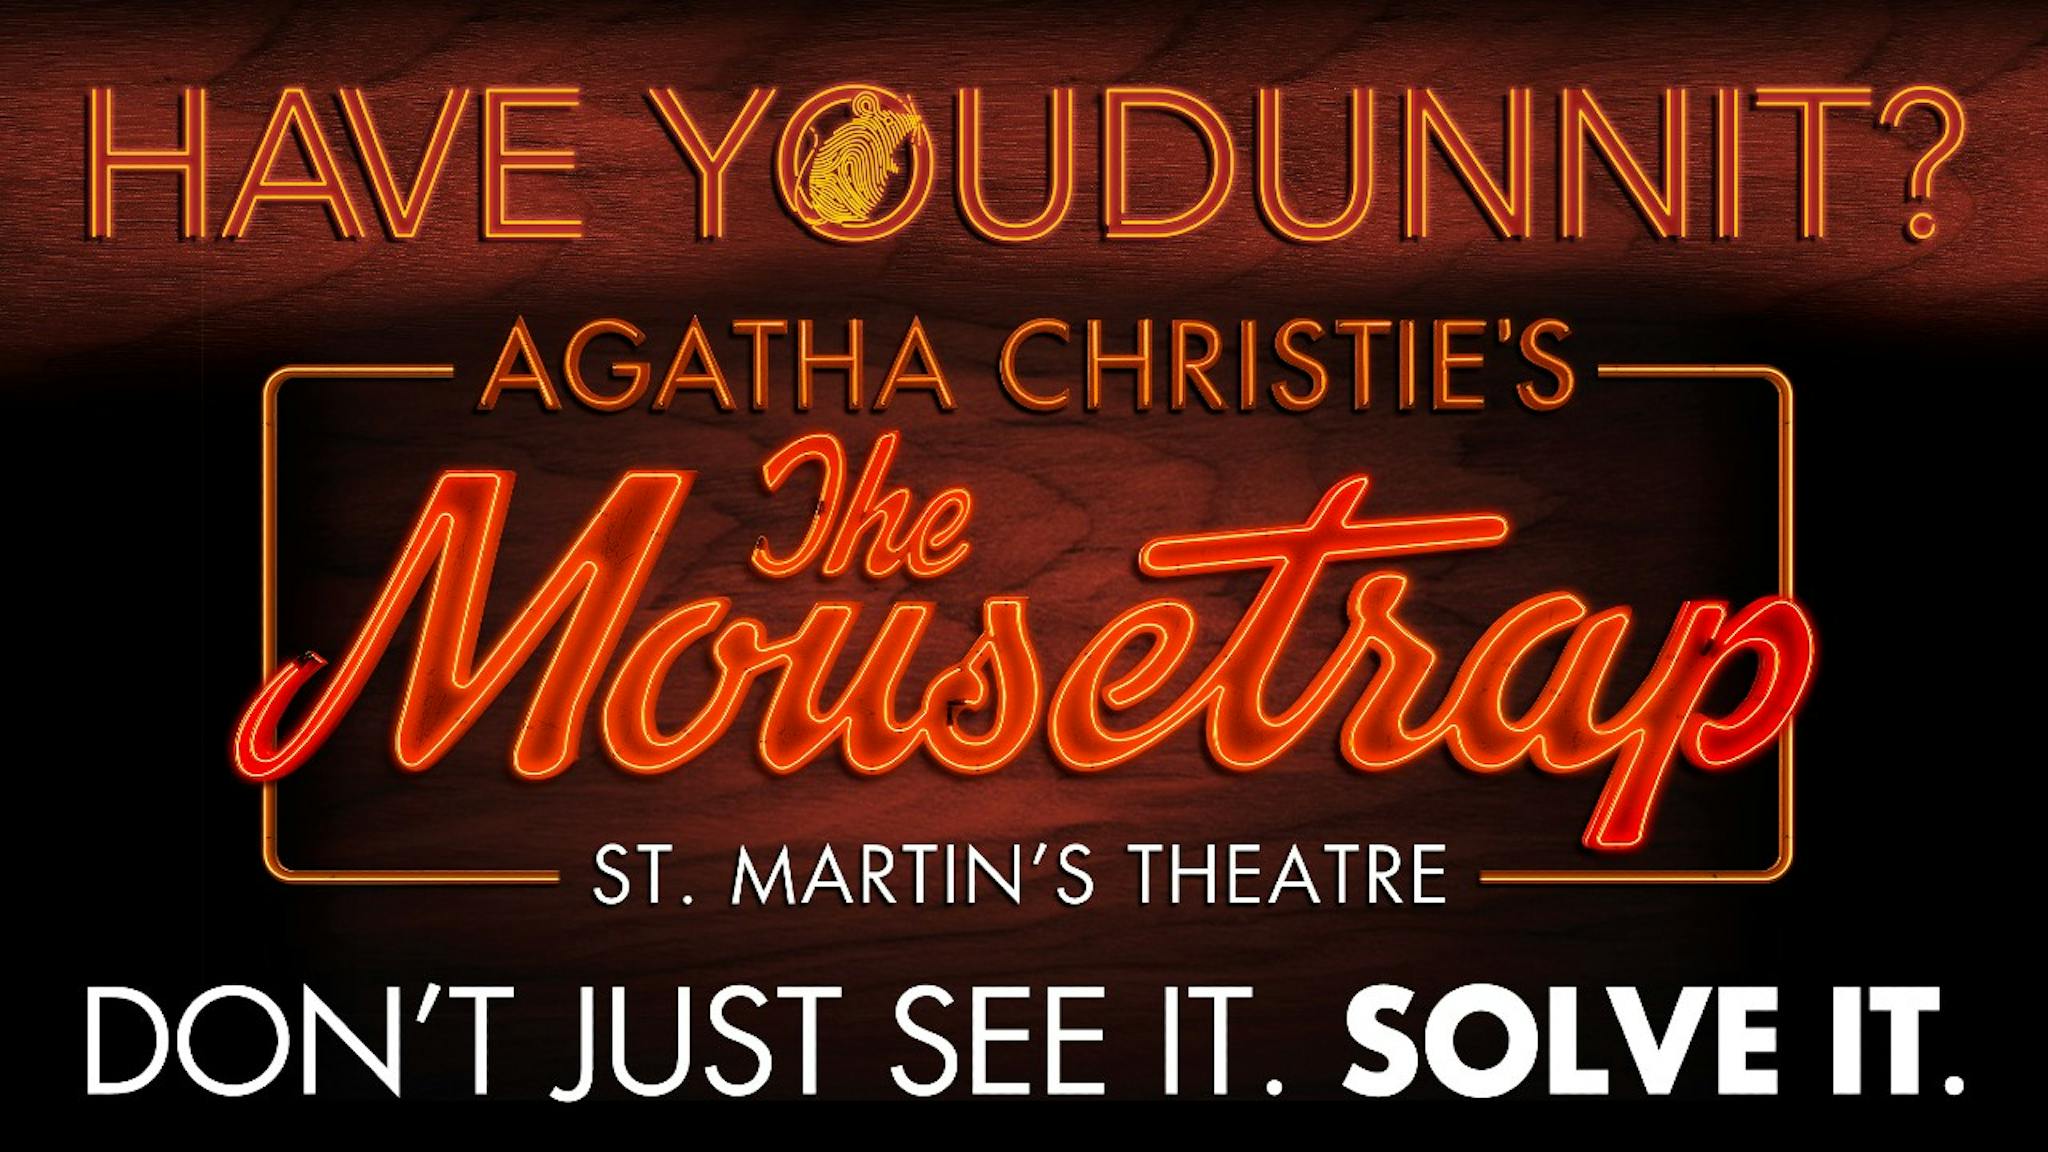 Get £20 Rush Tickets to ‘The Mousetrap’ in London on TodayTix